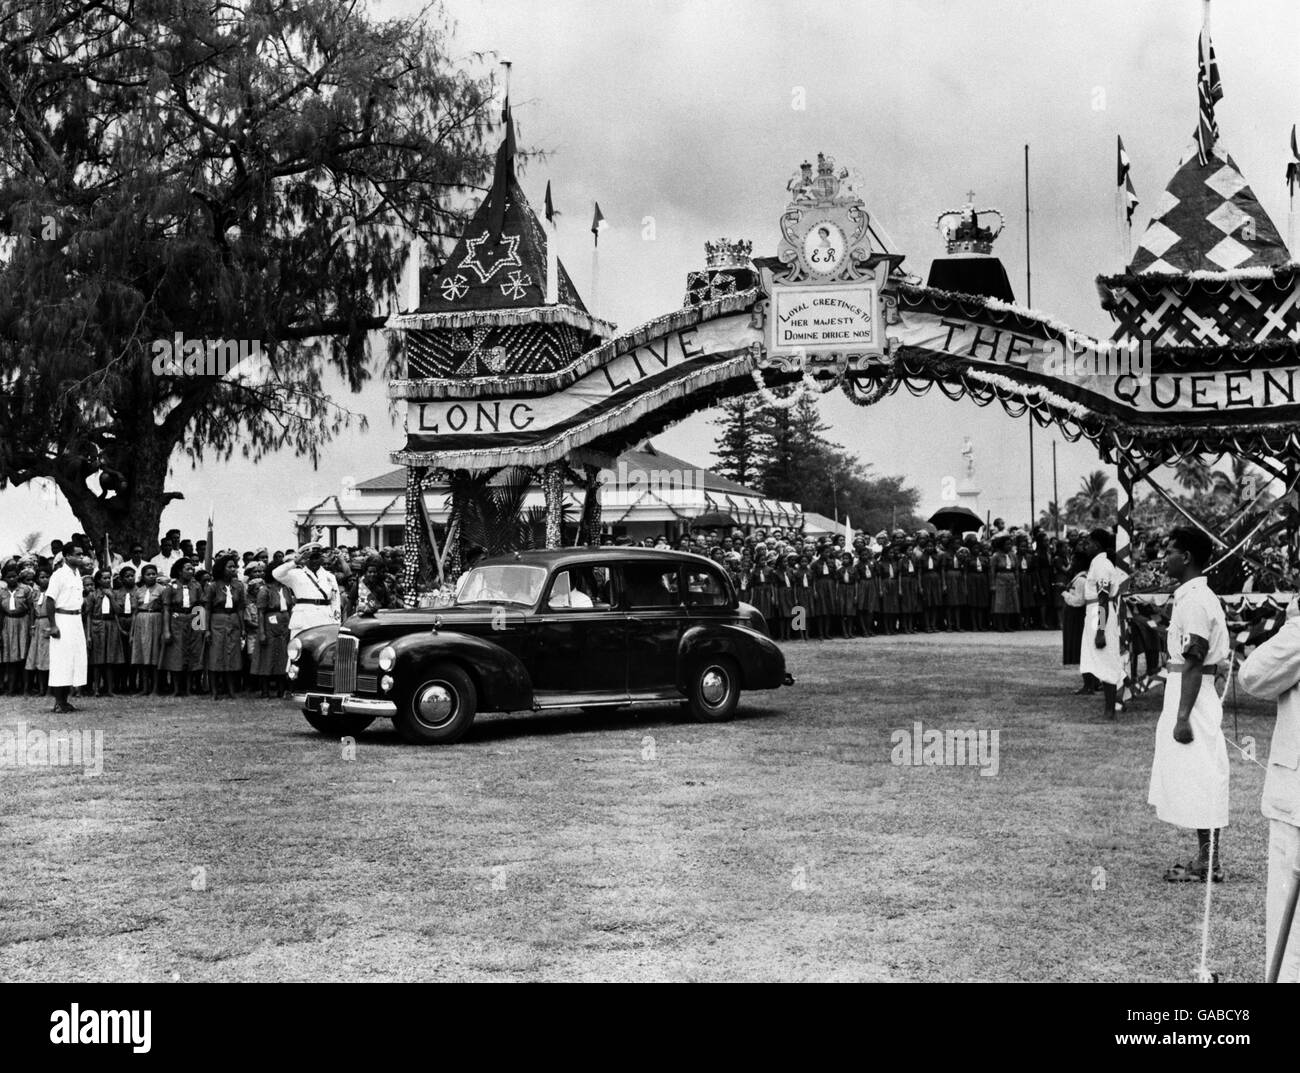 A car of the Royal procession passing through the ornate triumphal arch, part of the decorations for the visit of the Queen and the Duke of Edinburgh to Nukualofa, capital of Queen Salote, on the island of Tonga during the Commonwealth tour. Stock Photo